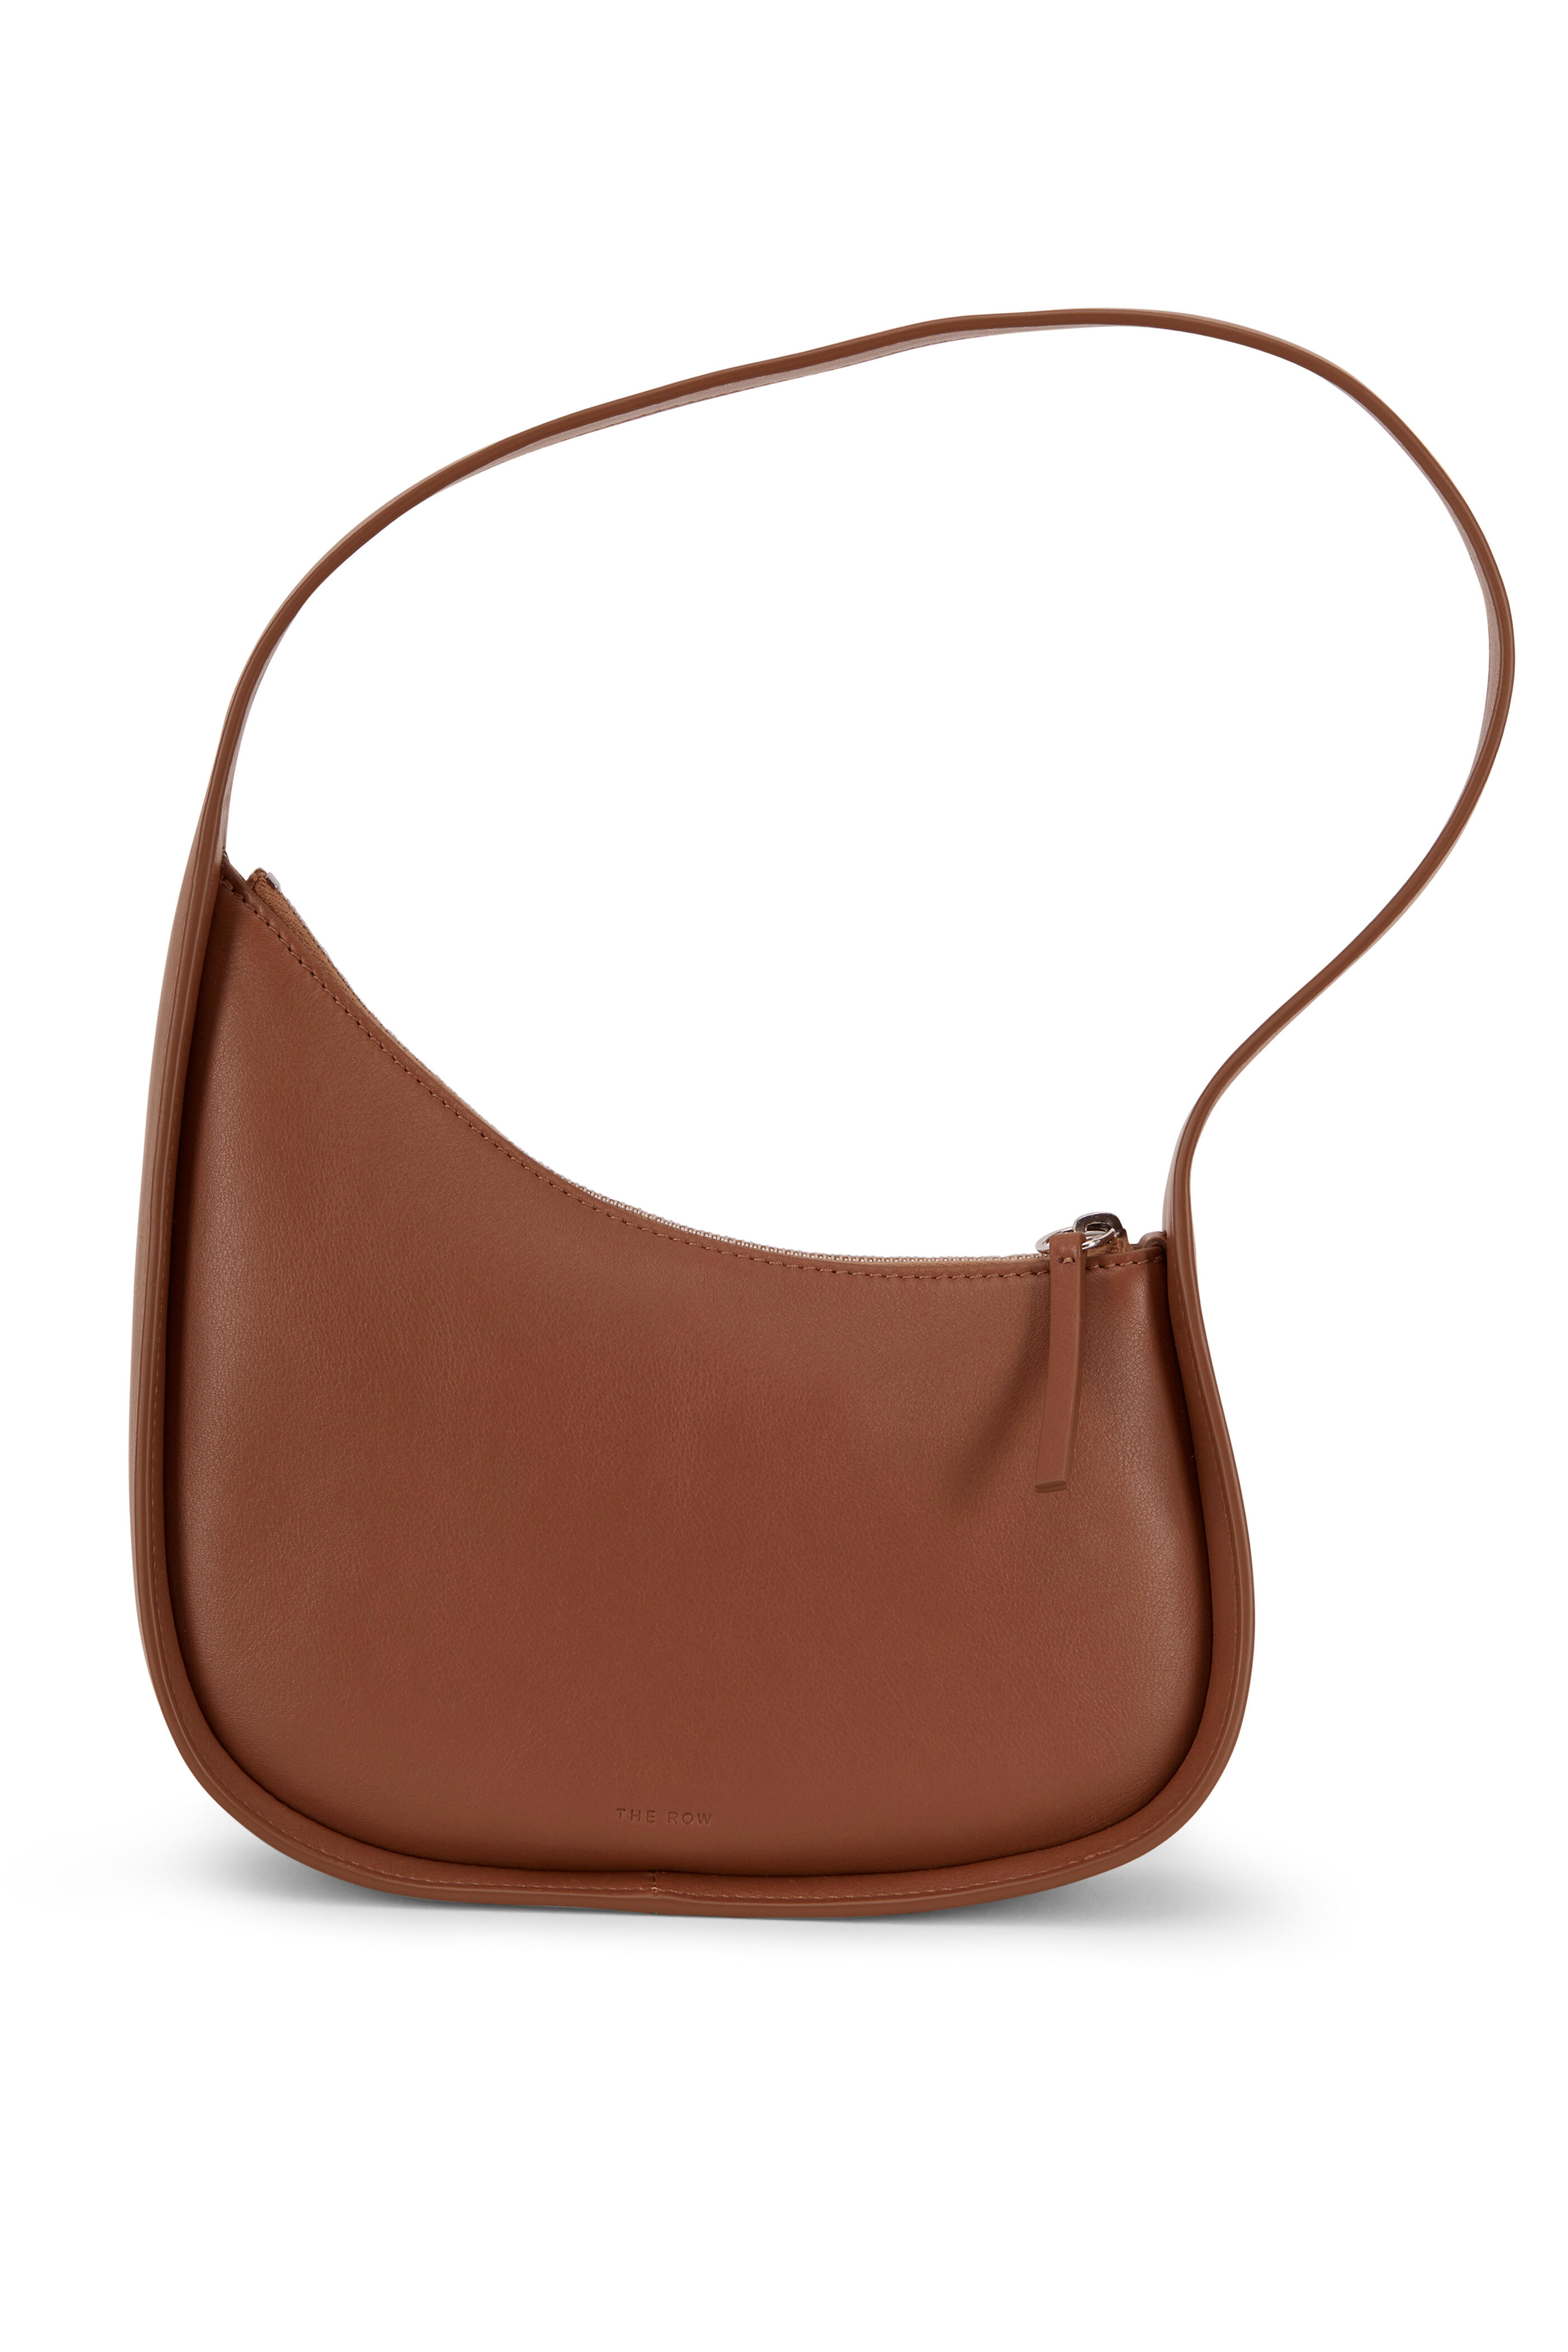 Printed PU Leather Sling Bag - Chestnut / One Size